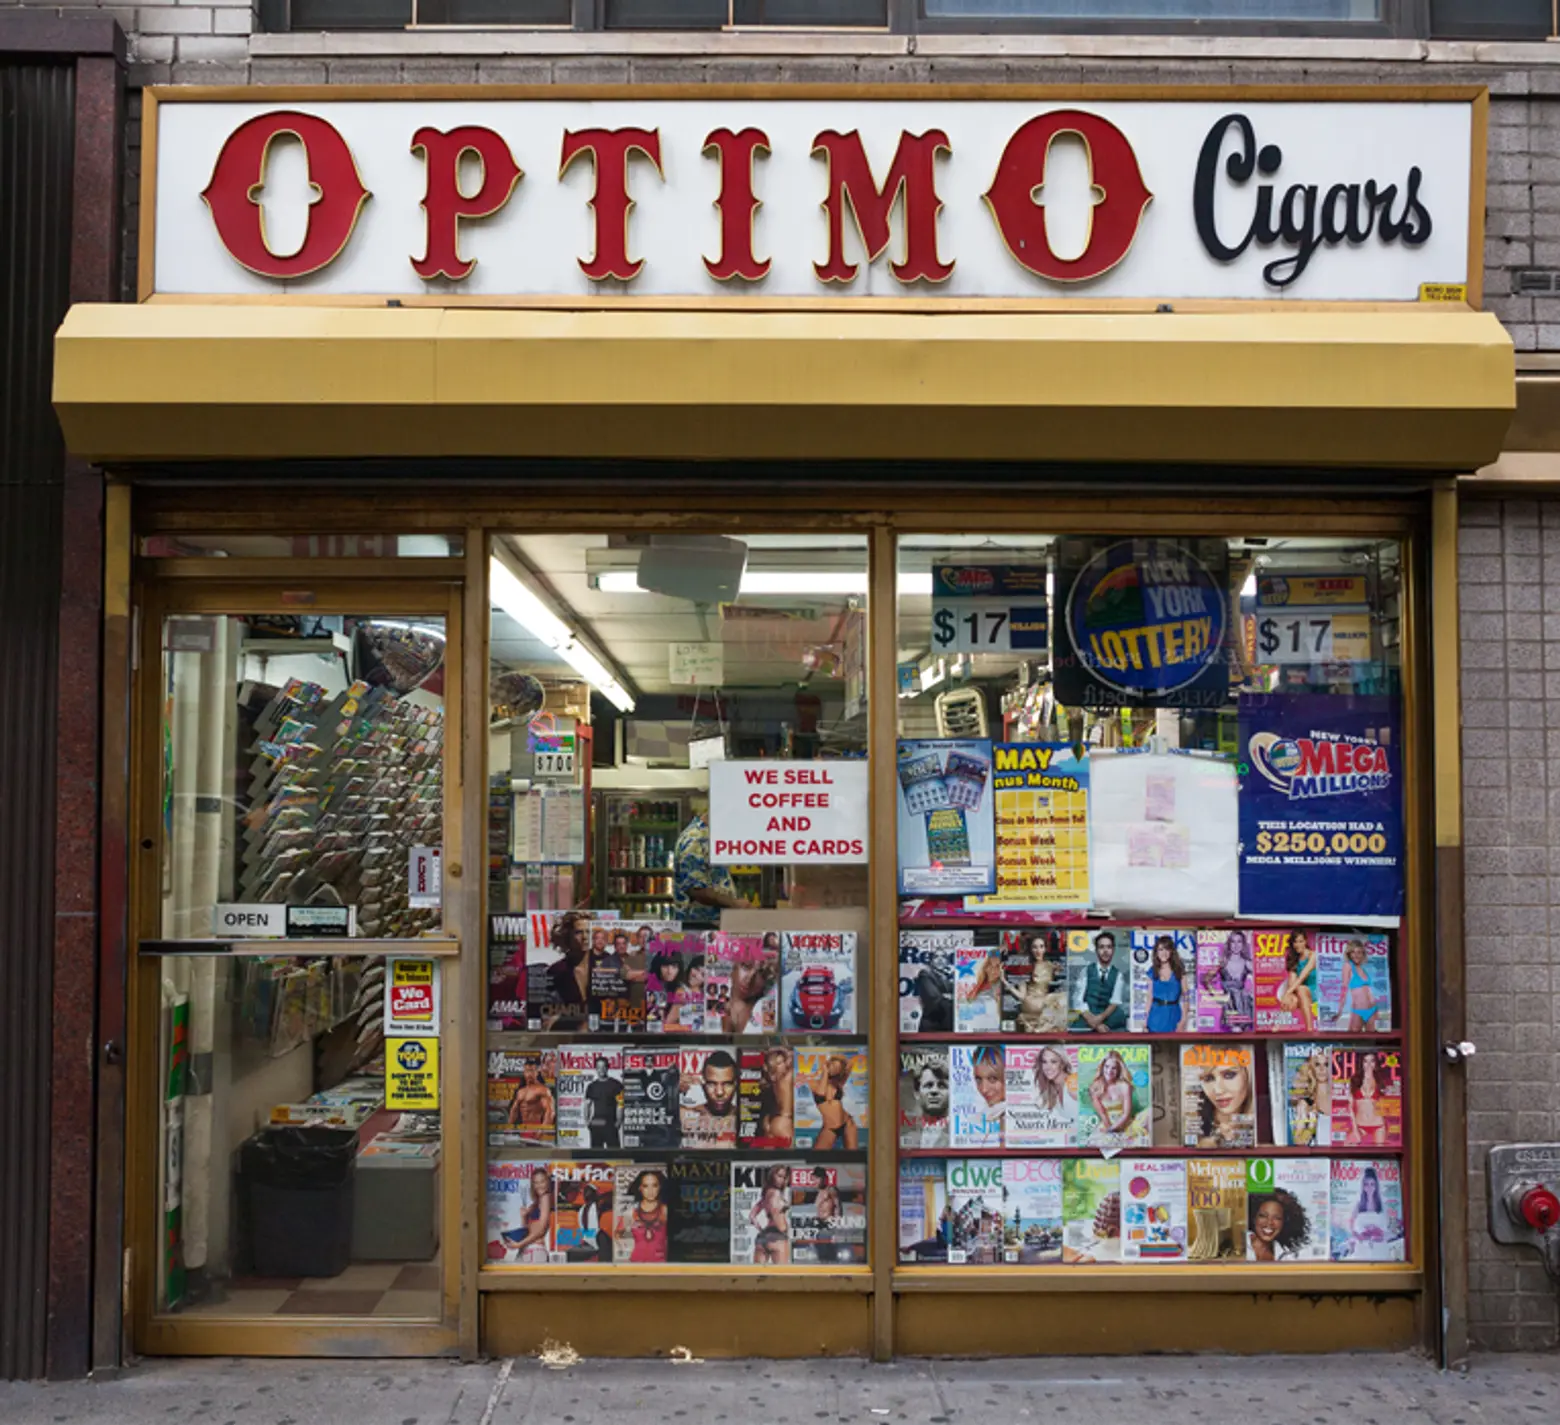 Optimo Cigars, Privilege Signs, James and Karla Murray, disappearing storefronts, NYC mom and pops